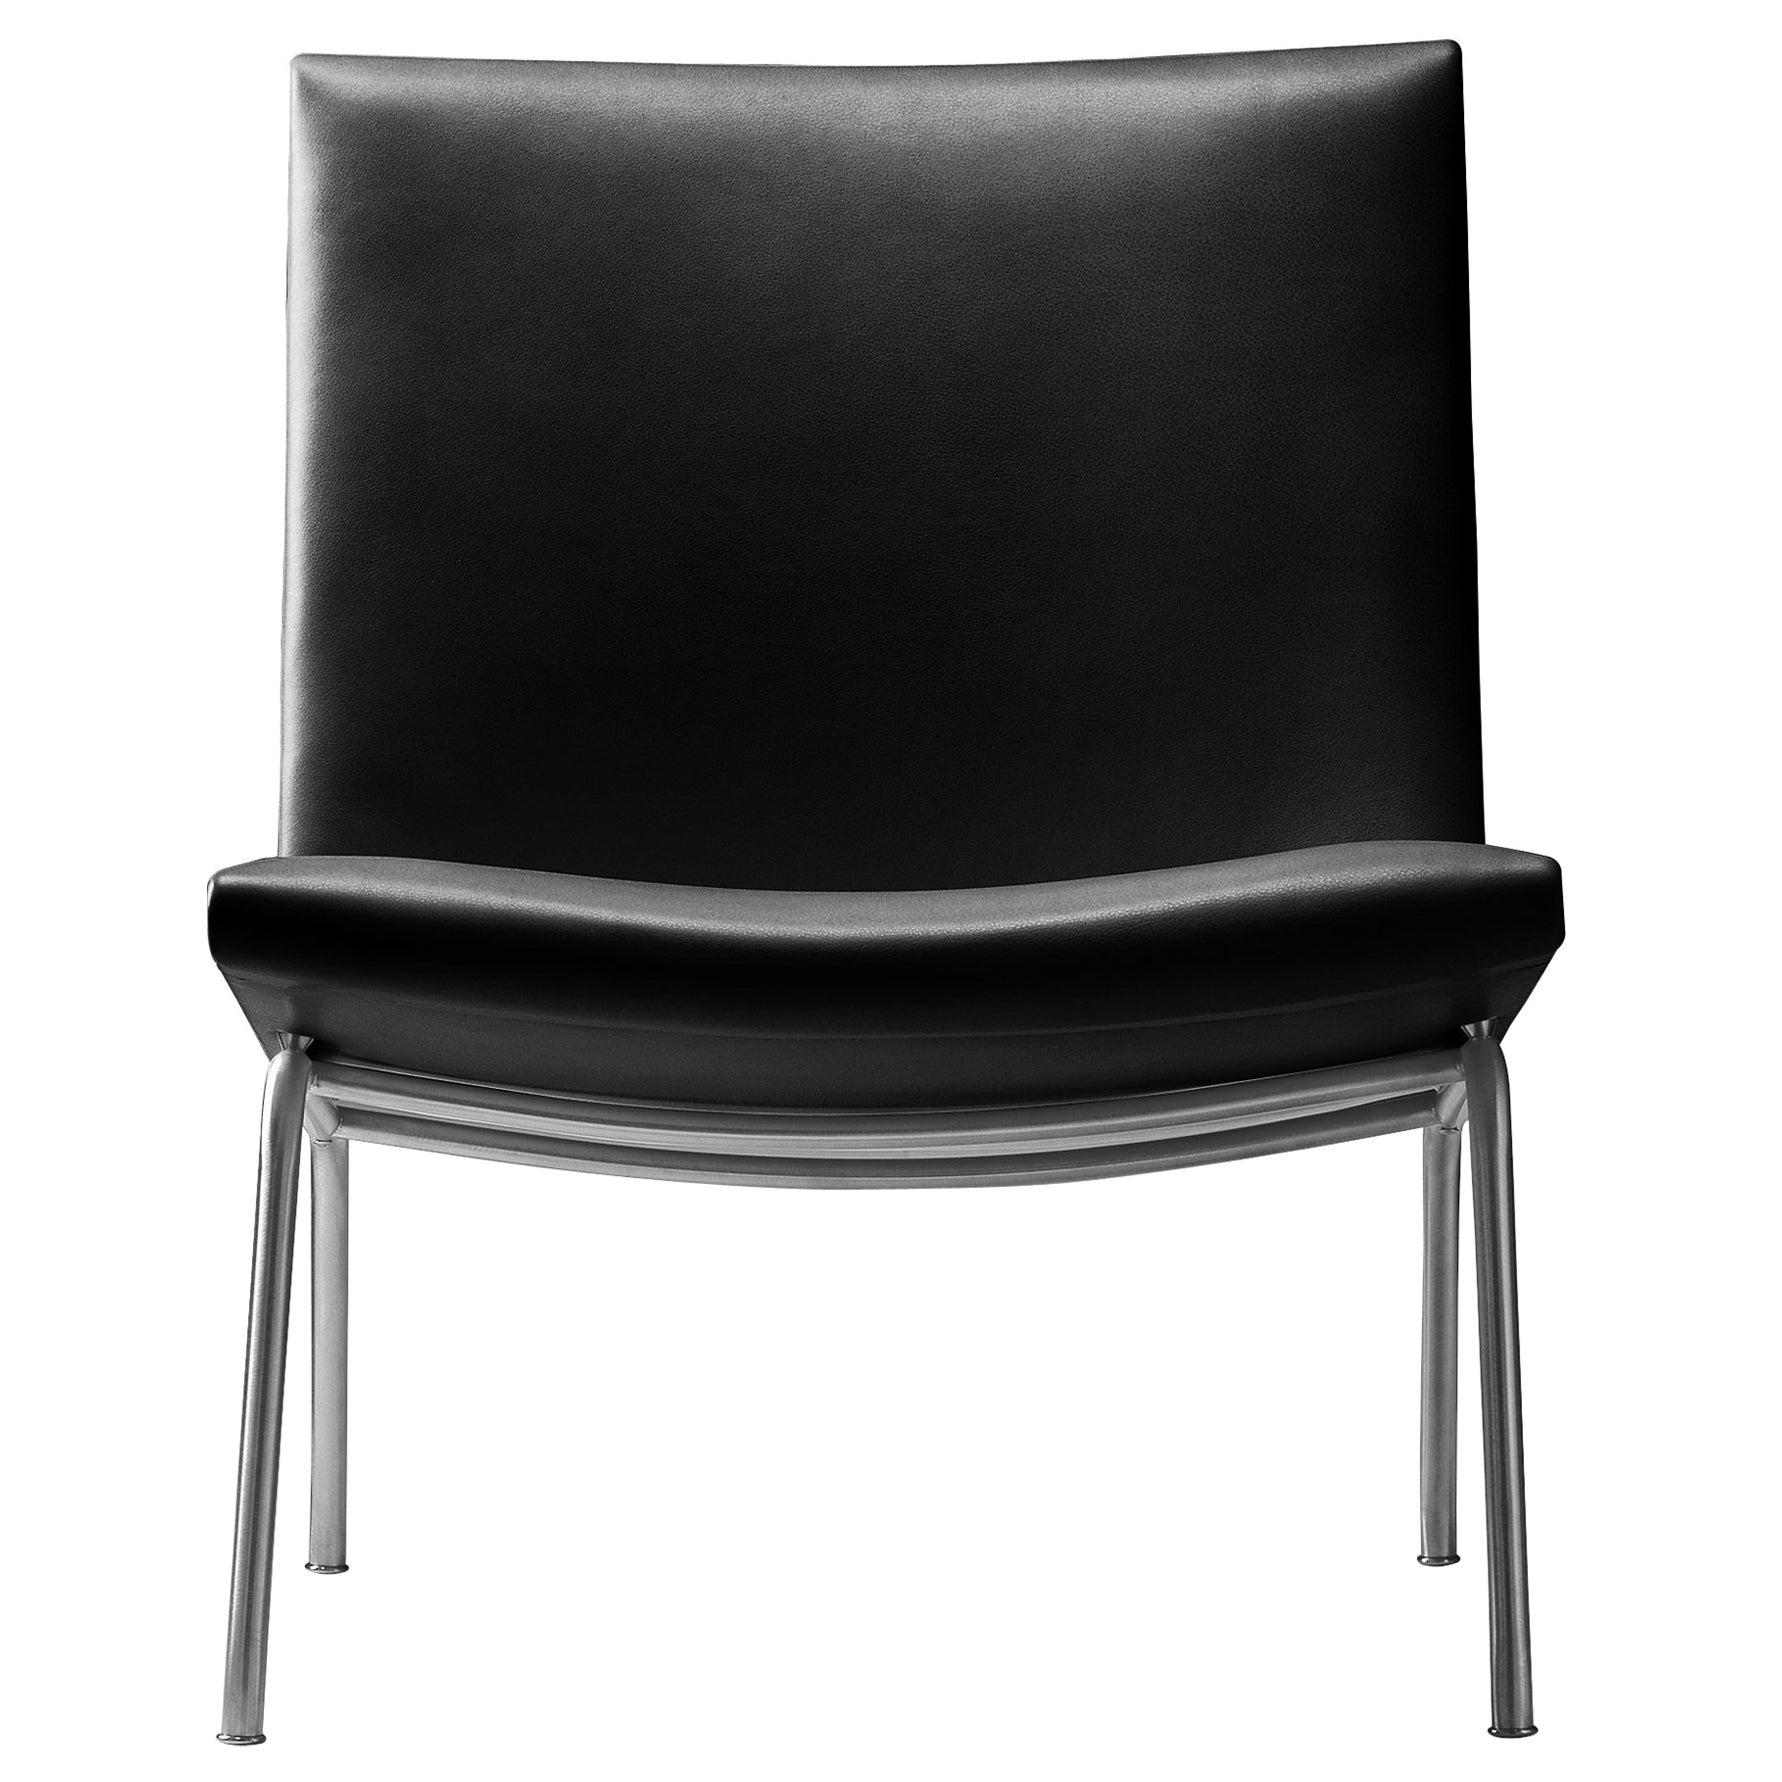 CH401 Kastrup Chair in Stainless Steel with Leather Seat by Hans J. Wegner